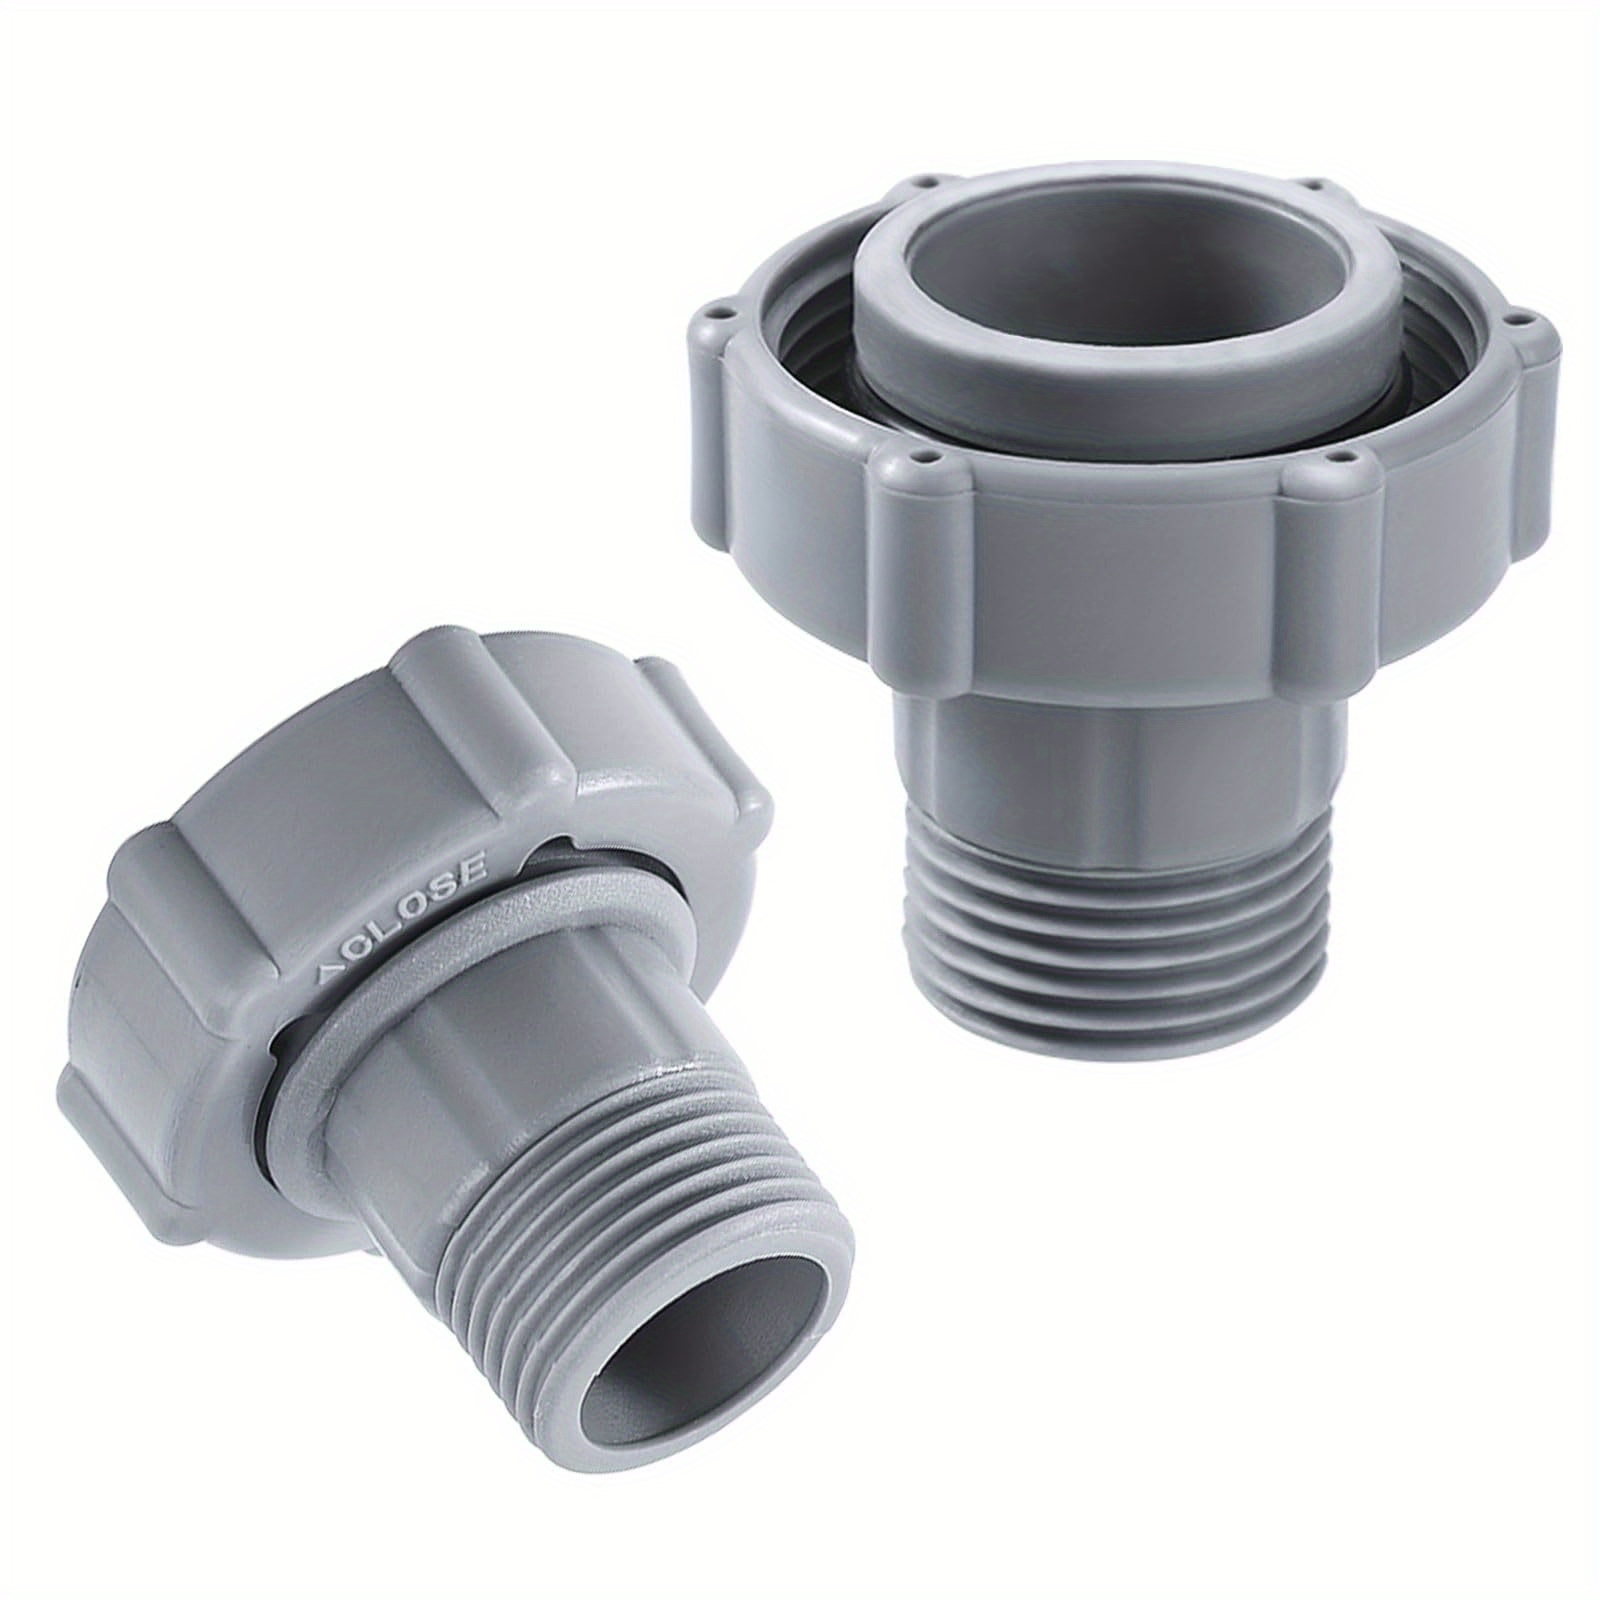 

2pcs Swimming Pool Drain Fitting Connects Compatible With Coleman, Id1.5in Connect To The Bottom Of The Pool Swimming Pool Replacement Parts Internal Thread 3/4in Connect To The Garden Pipe